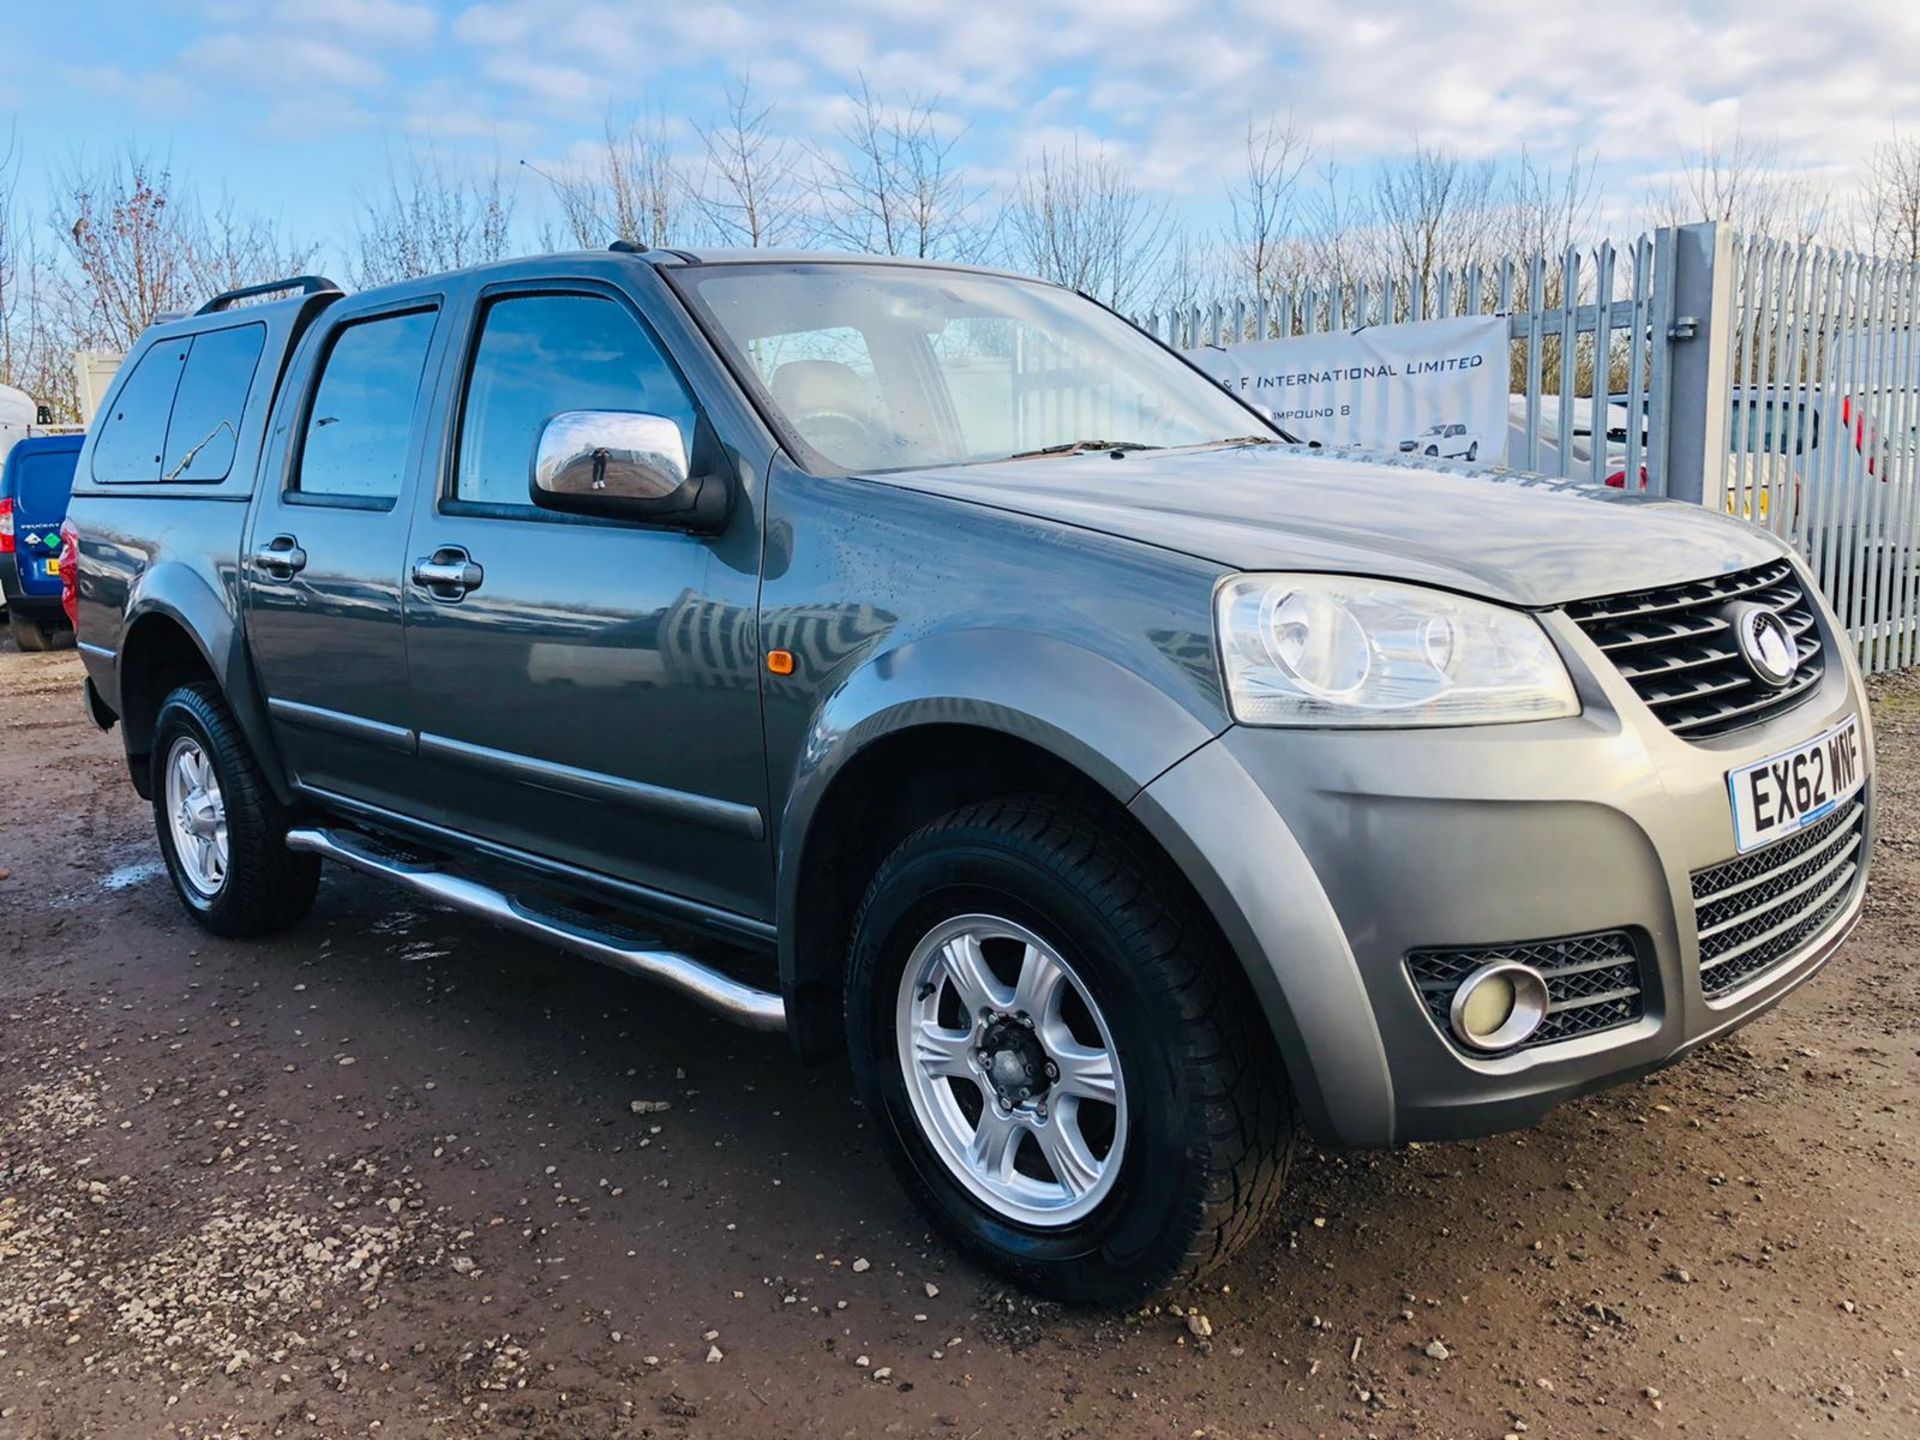 Great Wall Steed 2.0 TD 143 SE ( Special Equipment ) 4x4 Double Cab 2013 '62 Reg'